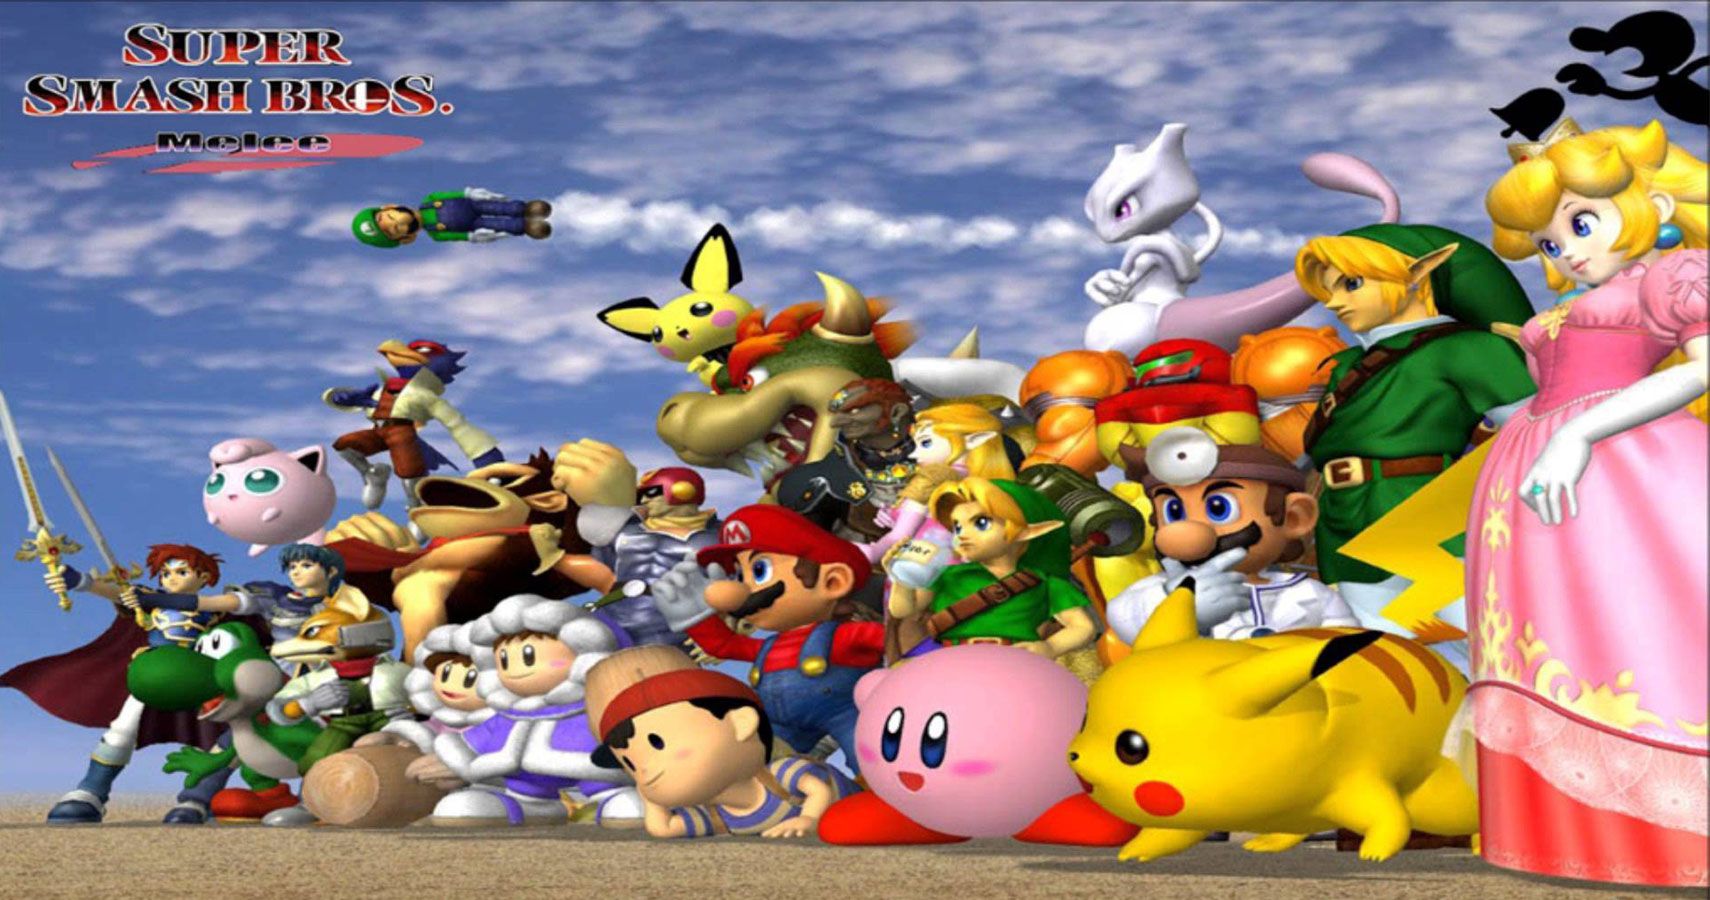 New Super Smash Bros. Melee Documentary To Premiere On Twitch In December